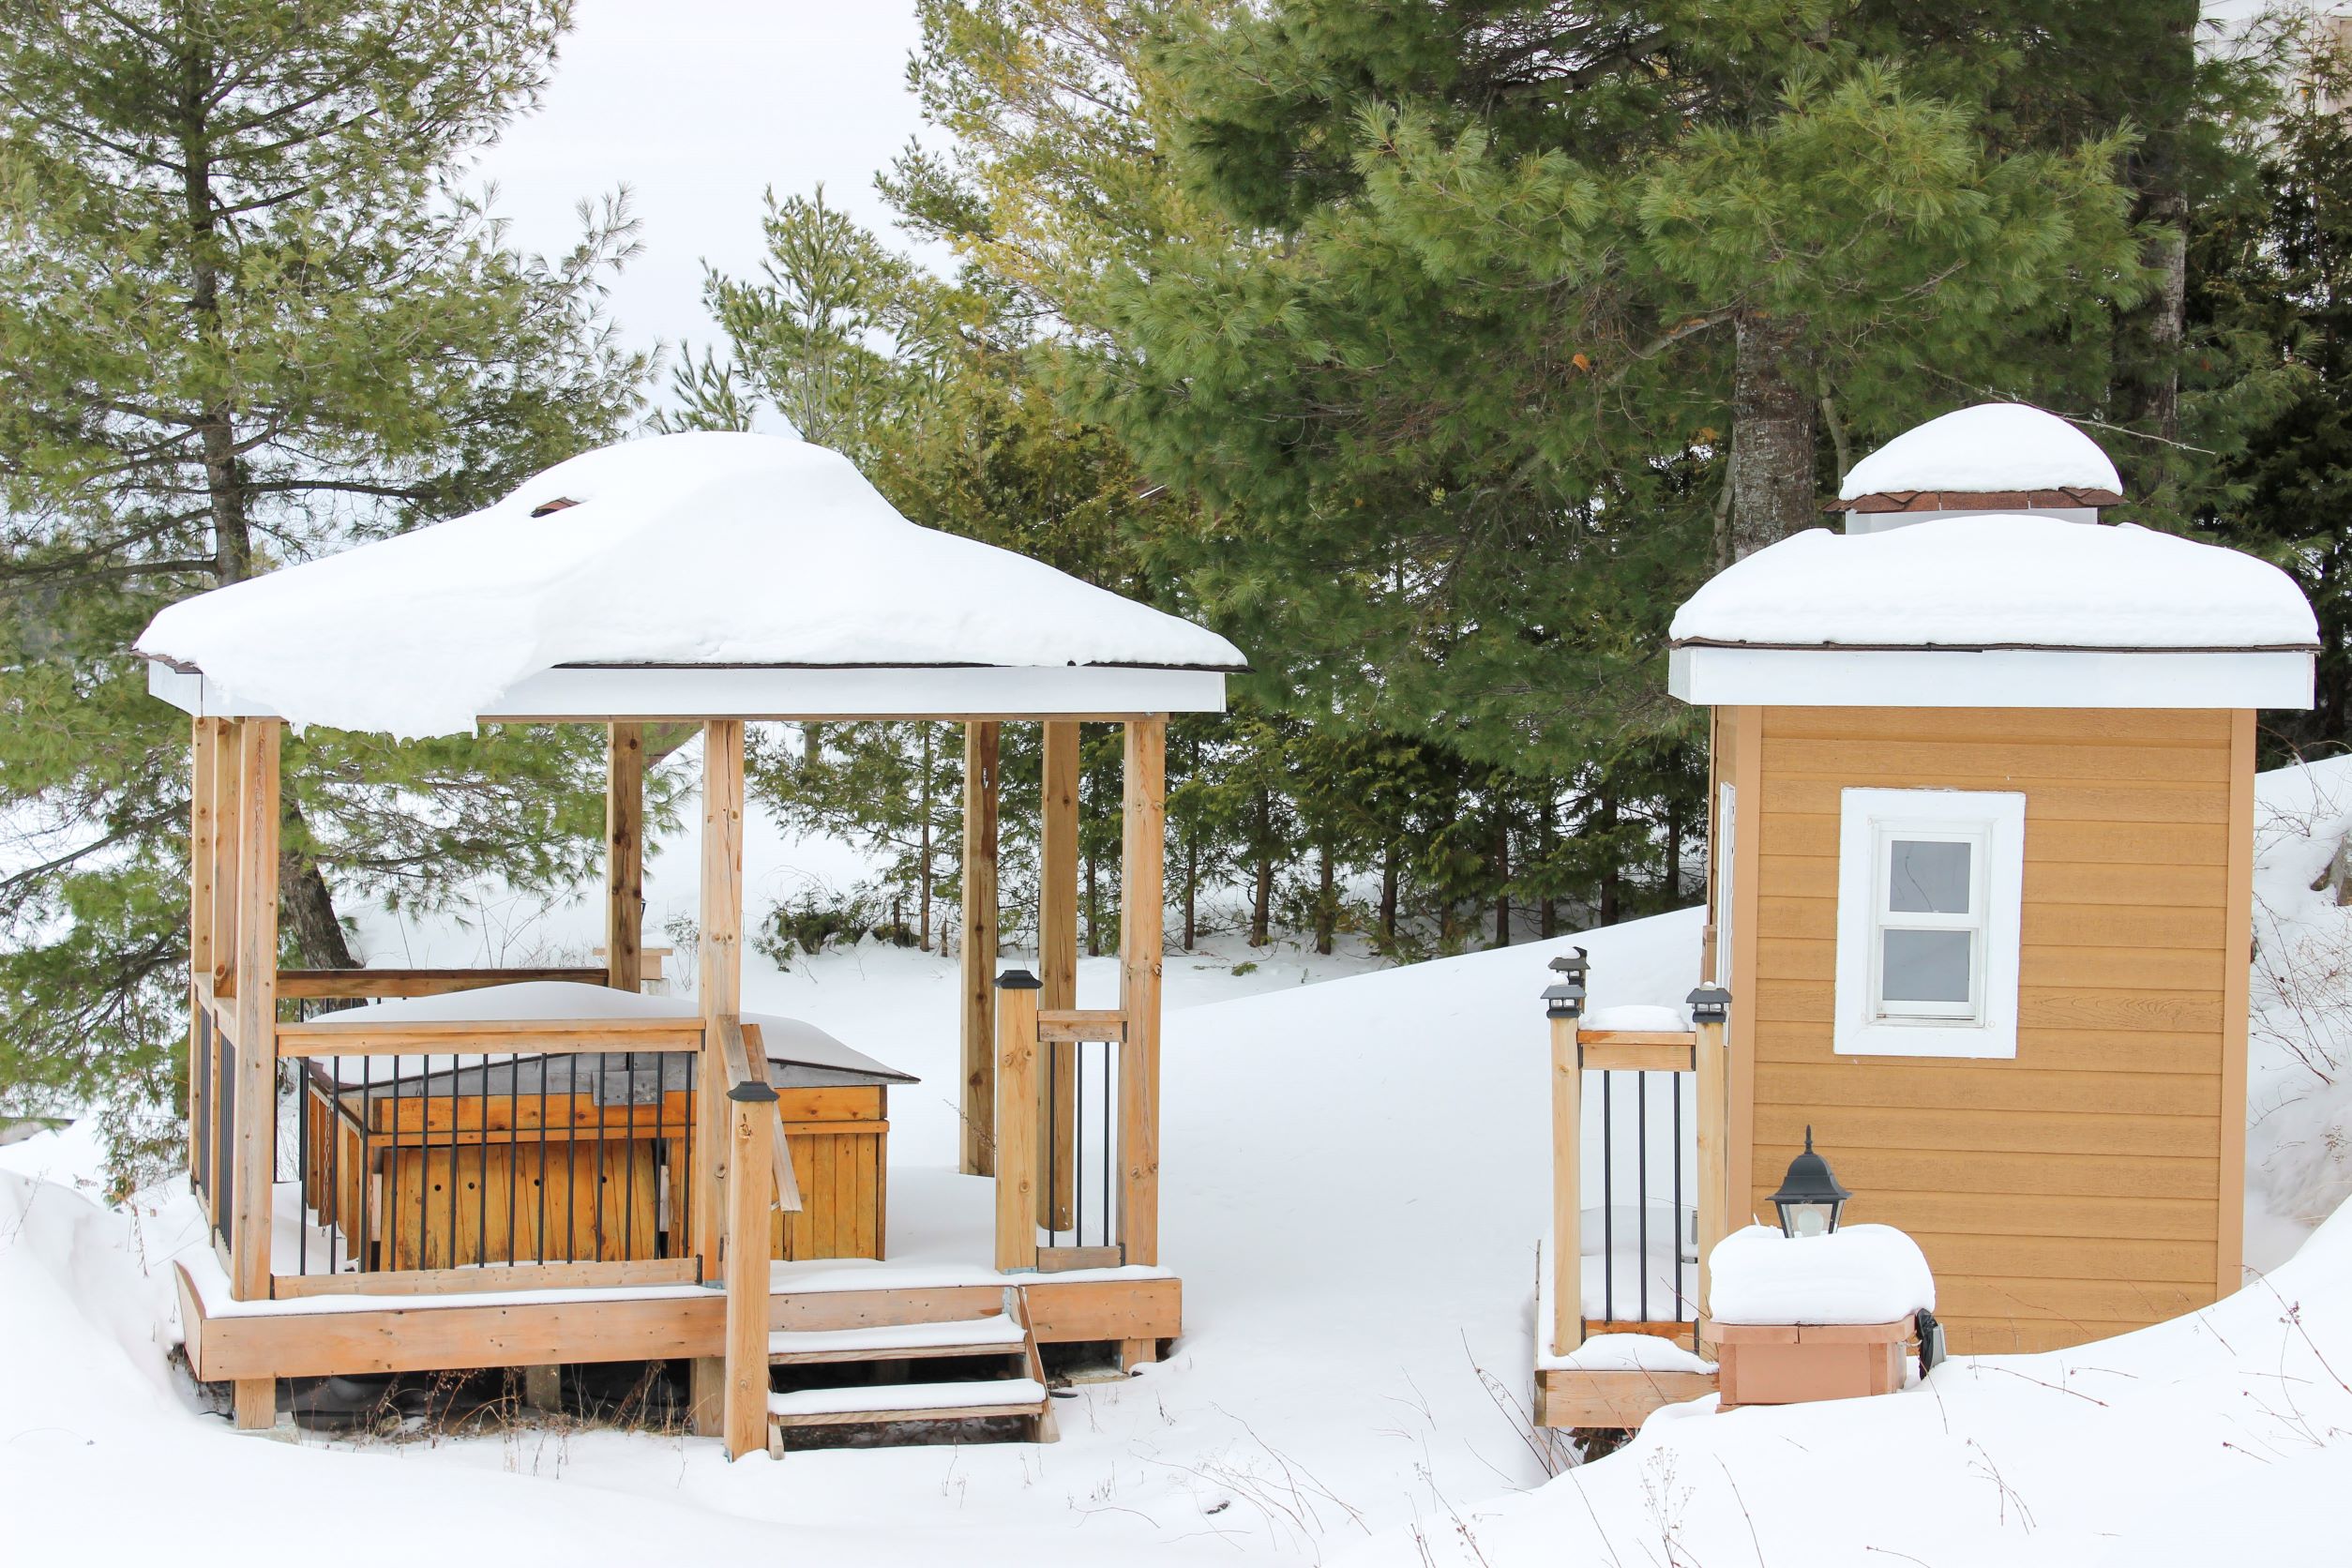 Lakeside Hot Tub and Sauna provide hours of relaxation and restores your sense of calm.